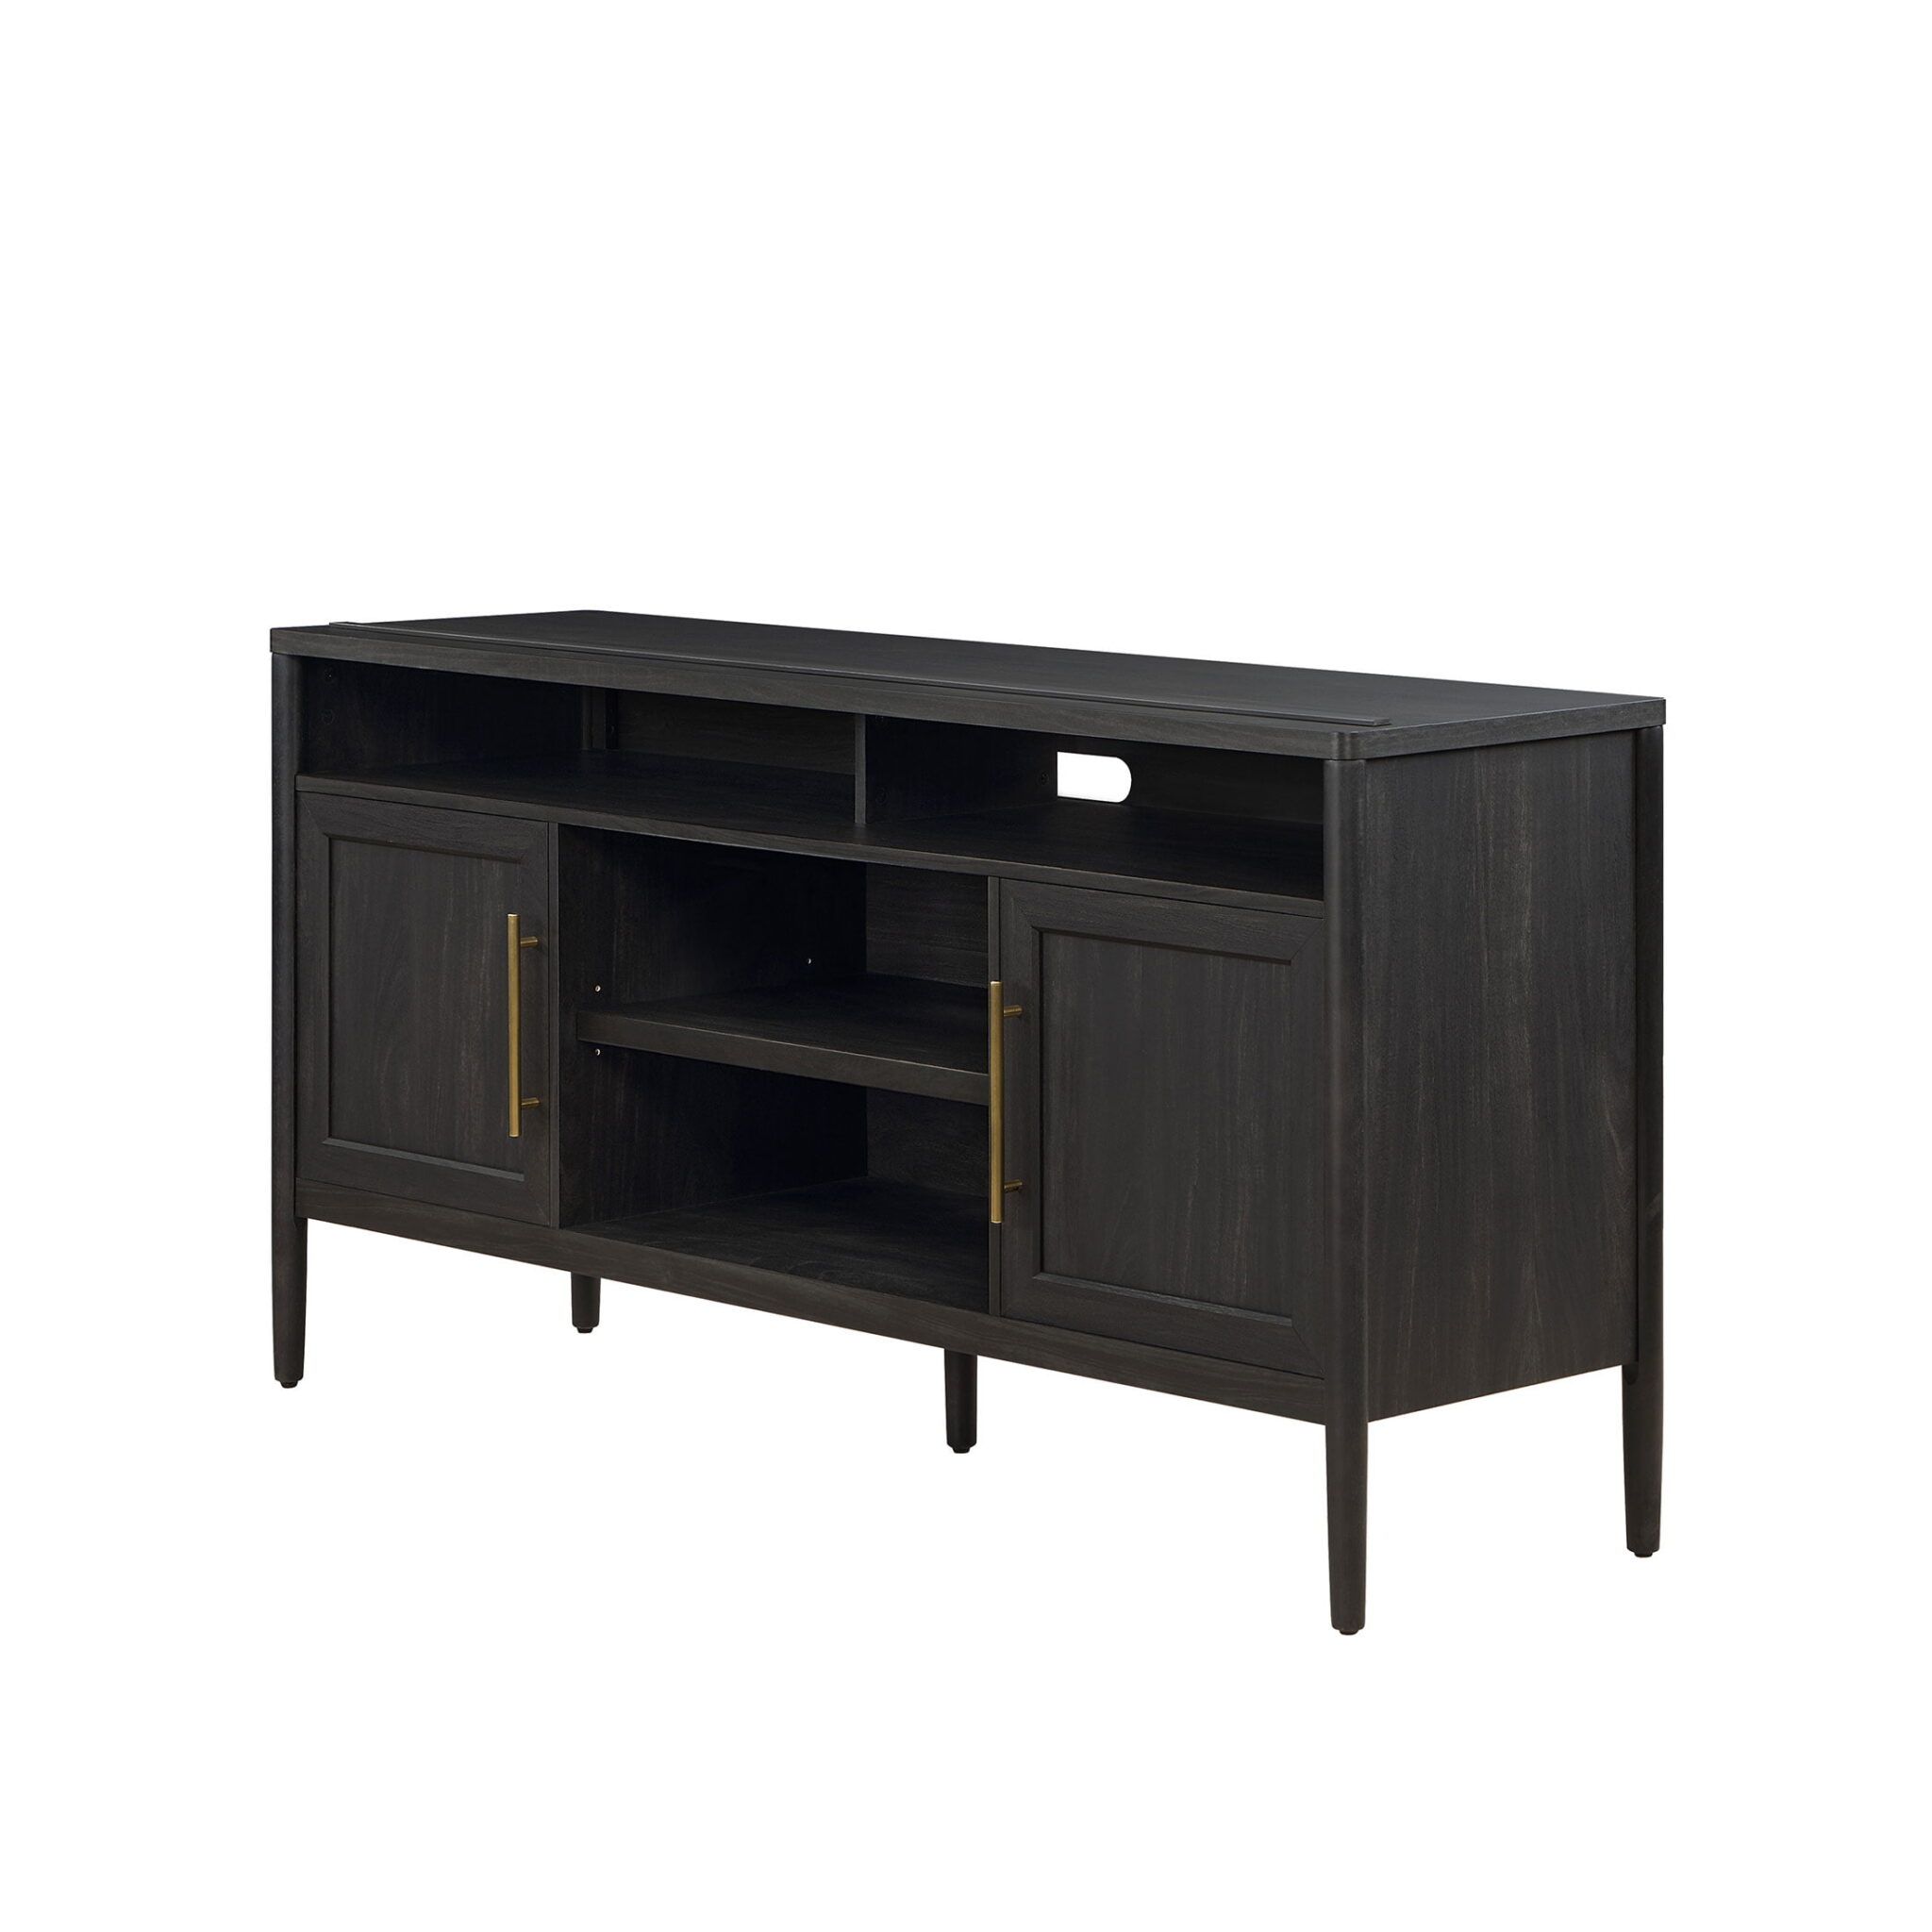 Better Homes & Gardens Oaklee Tv Stand For Tvs Up To 70”, Charcoal Inside Oaklee Tv Stands (View 8 of 20)